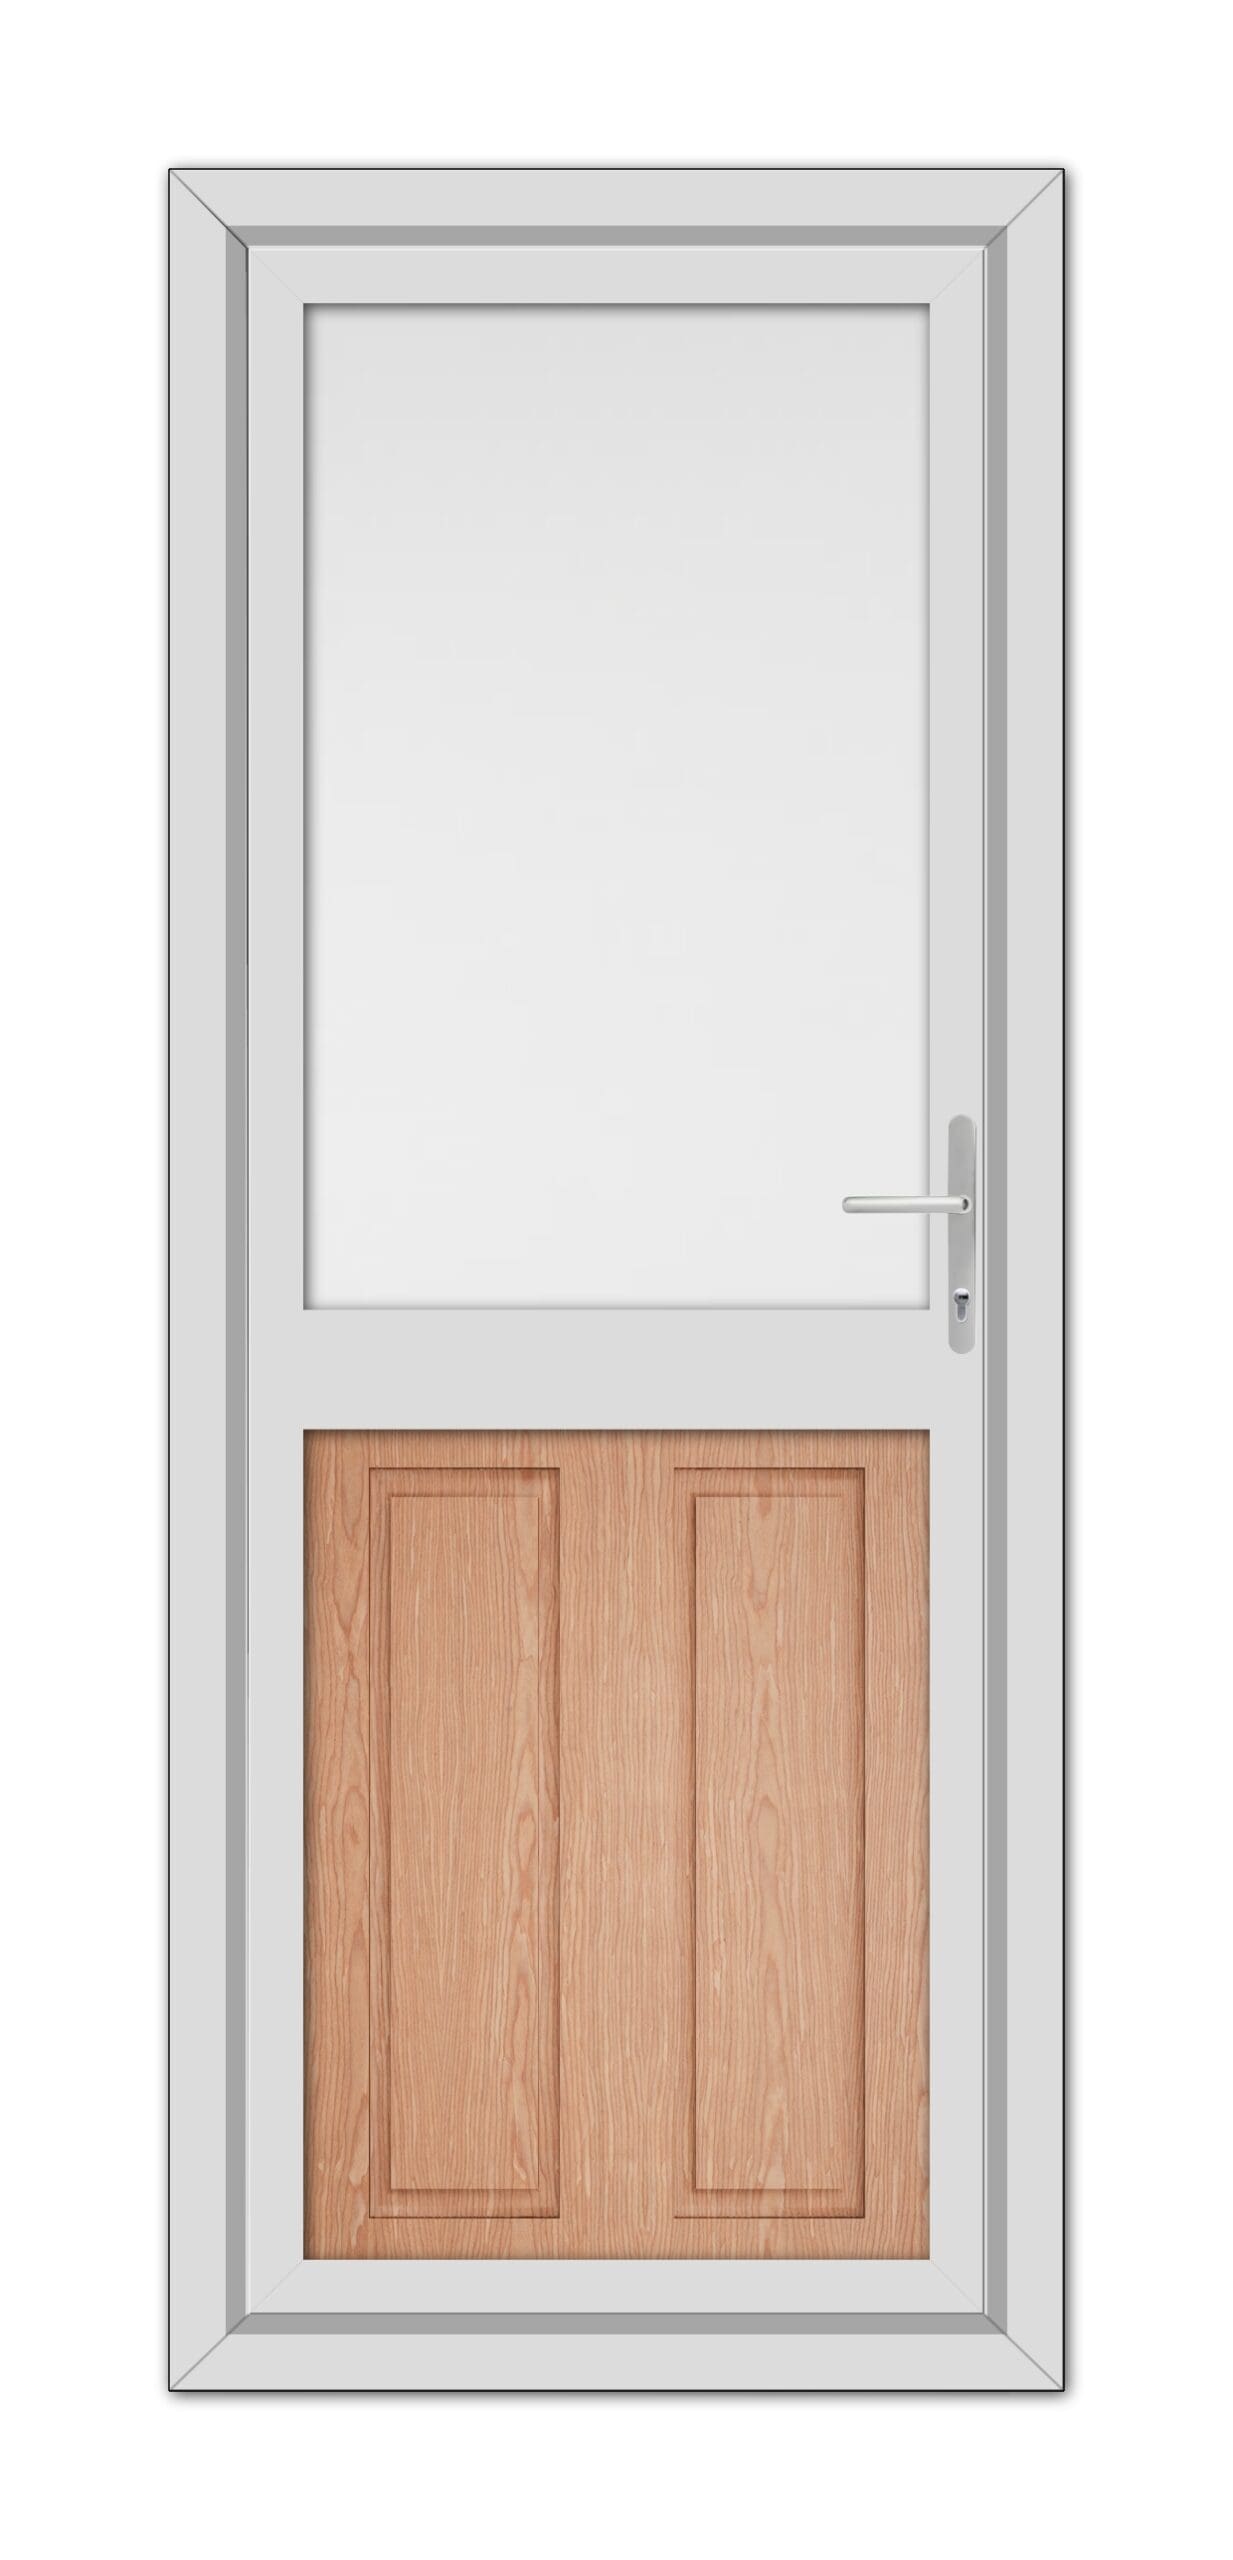 A modern Irish Oak Manor Half uPVC Back Door featuring a white frame with a top glass panel and lower wooden panels, complete with a metallic handle.